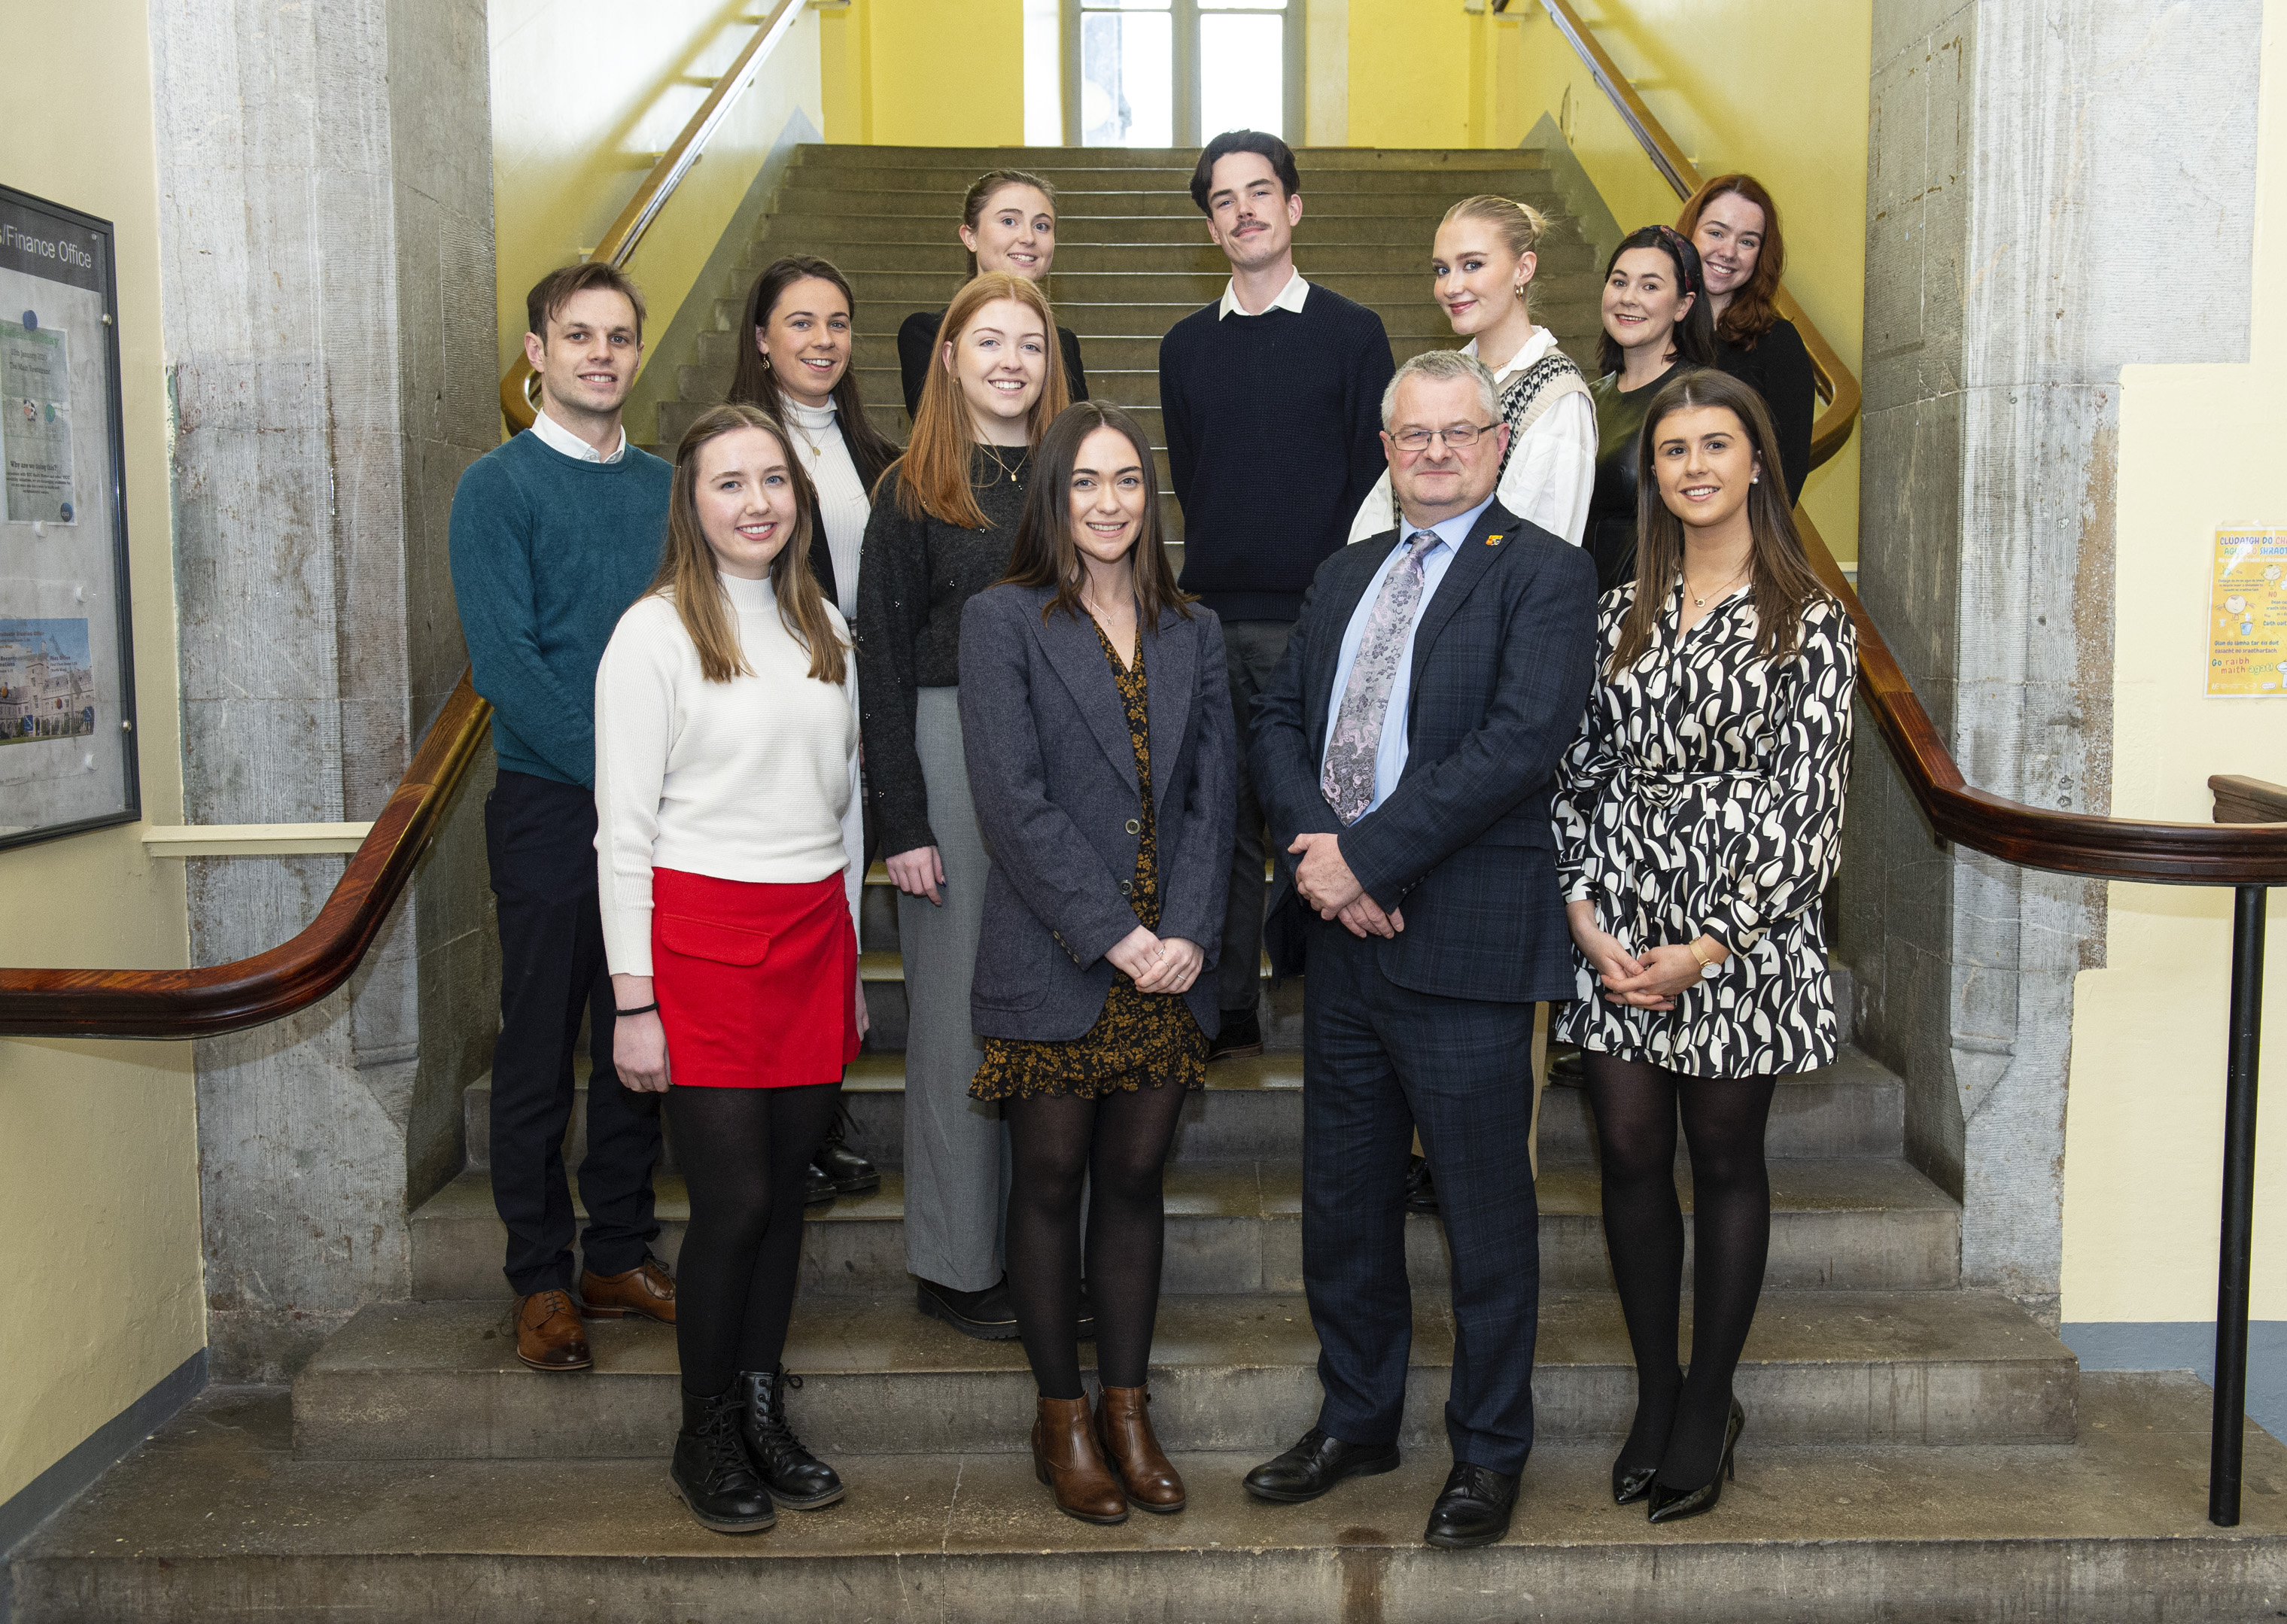 School of Law and UCC Law Society hold Dean's Reception for Alumni and Friends in Cork
